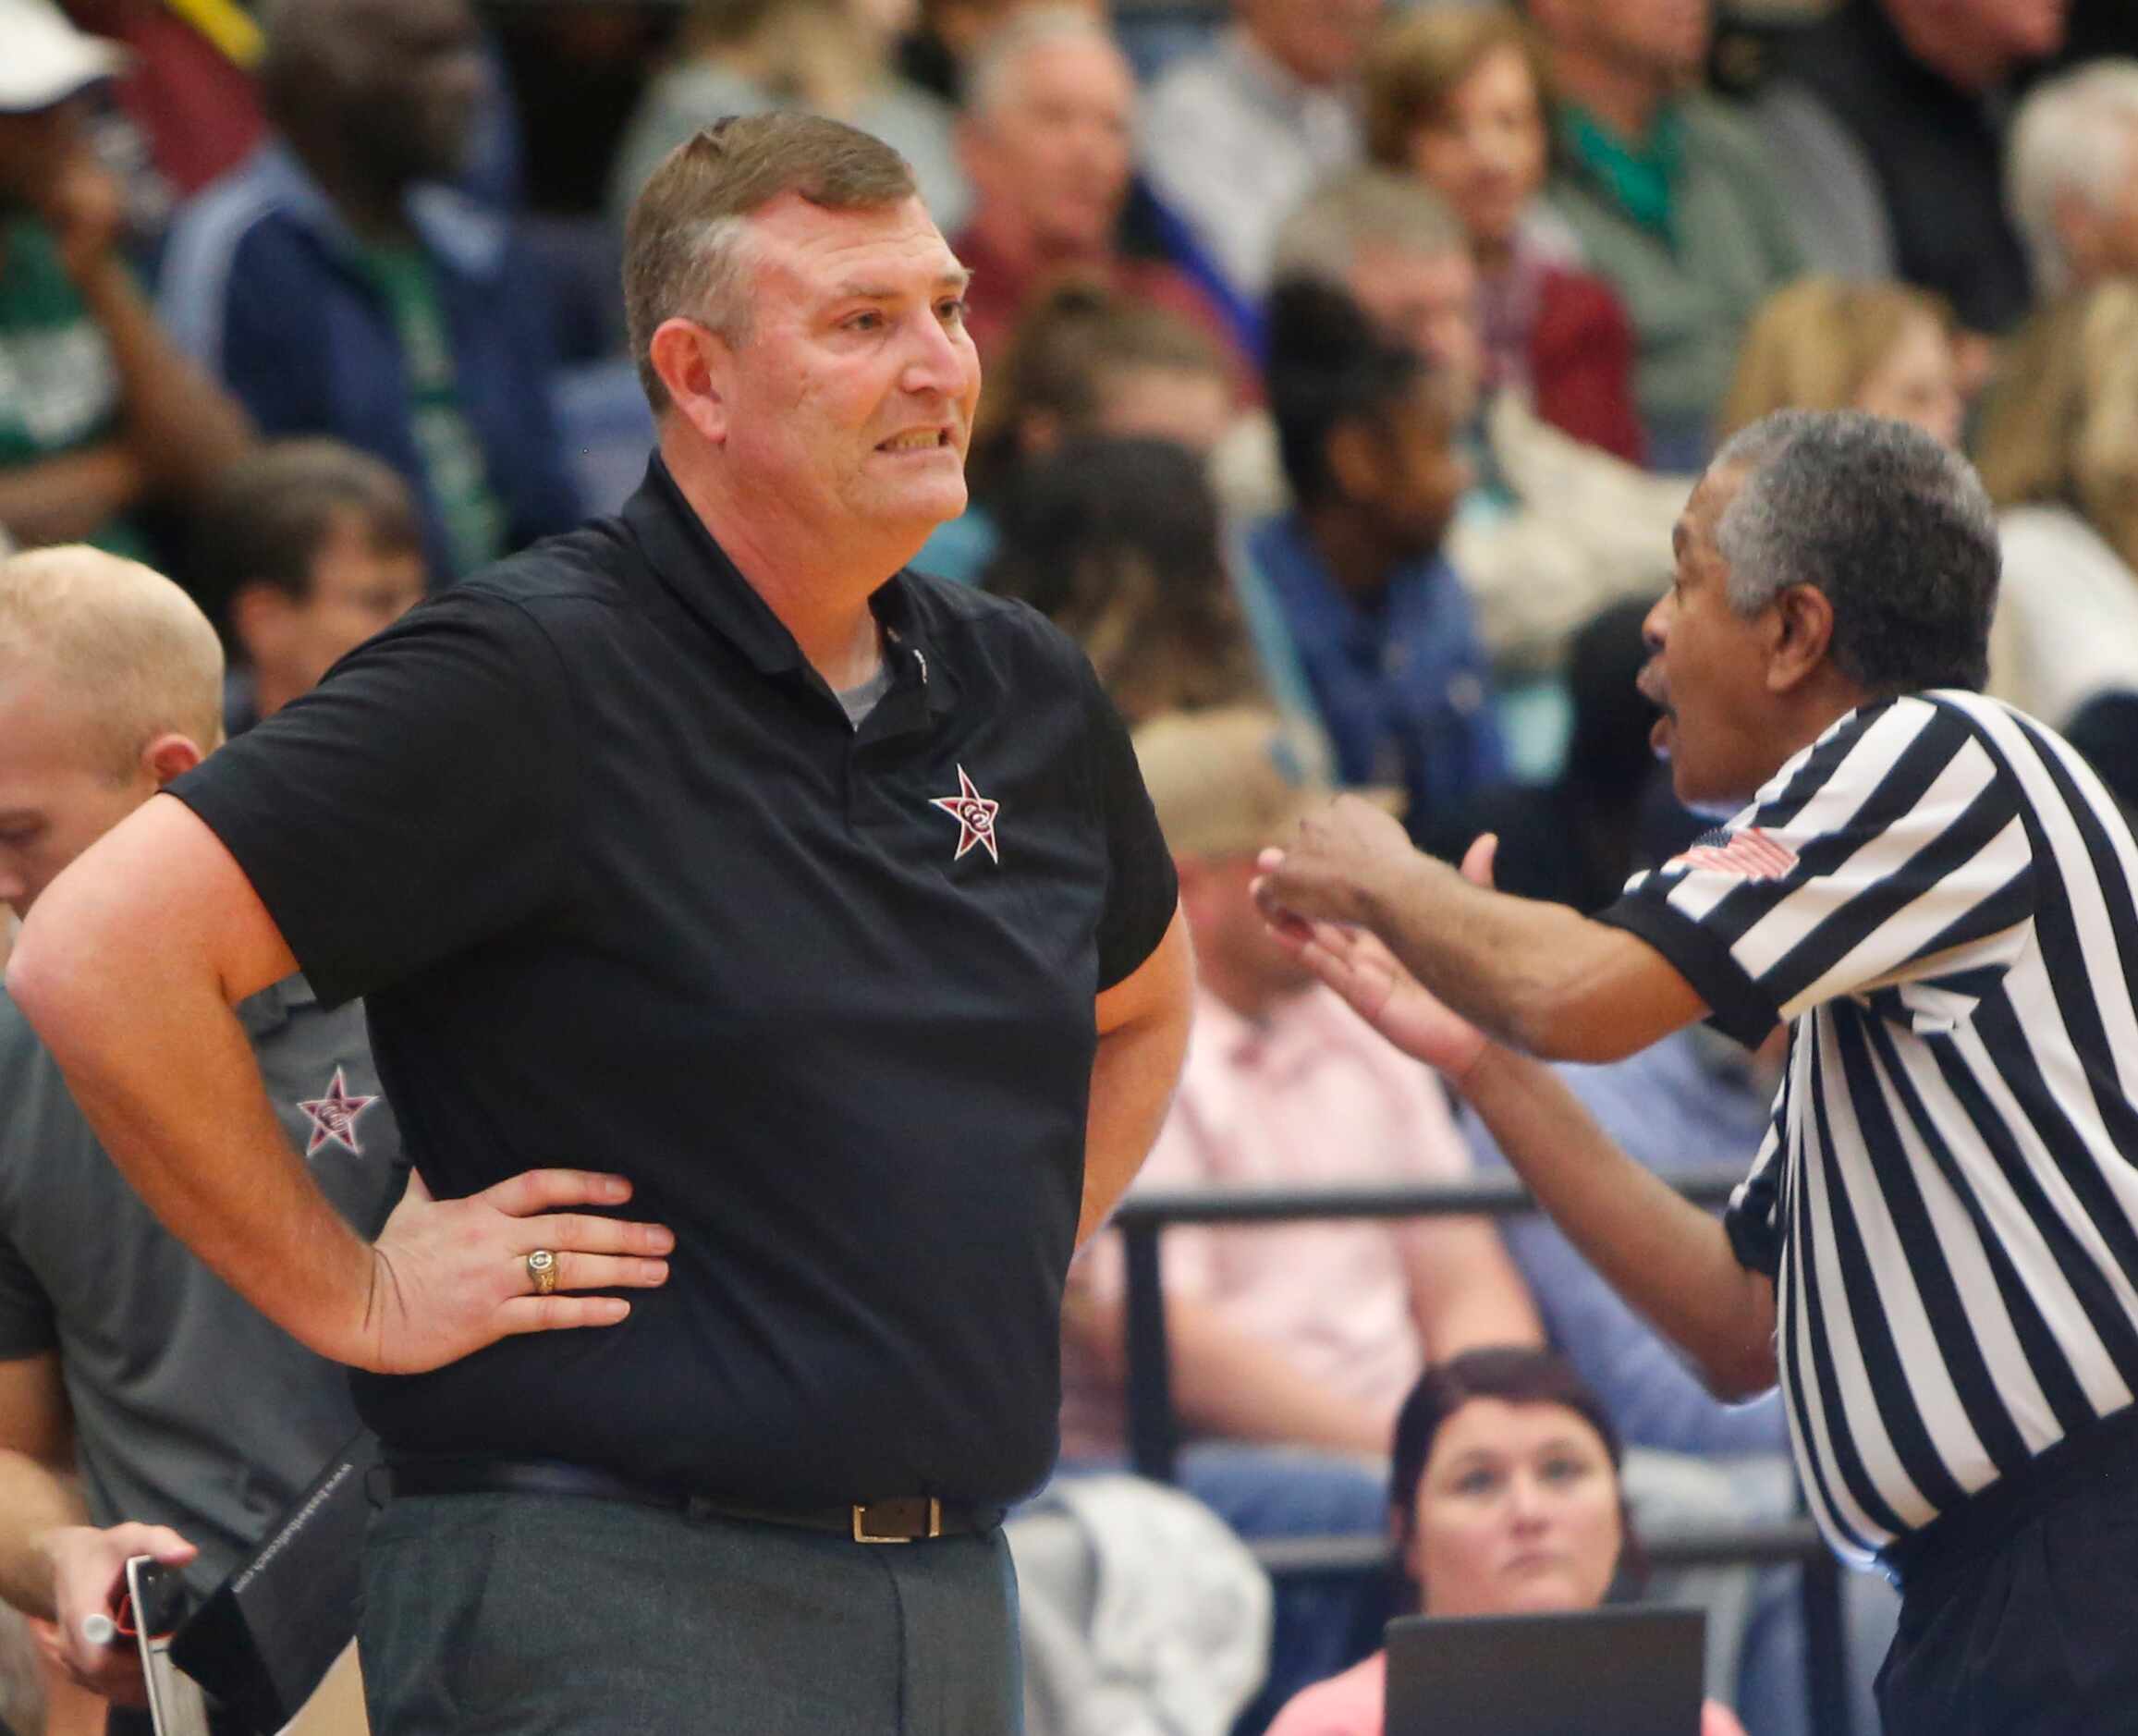 Coppell head coach Clint Schnell reacts after a foul was called against one of his players...